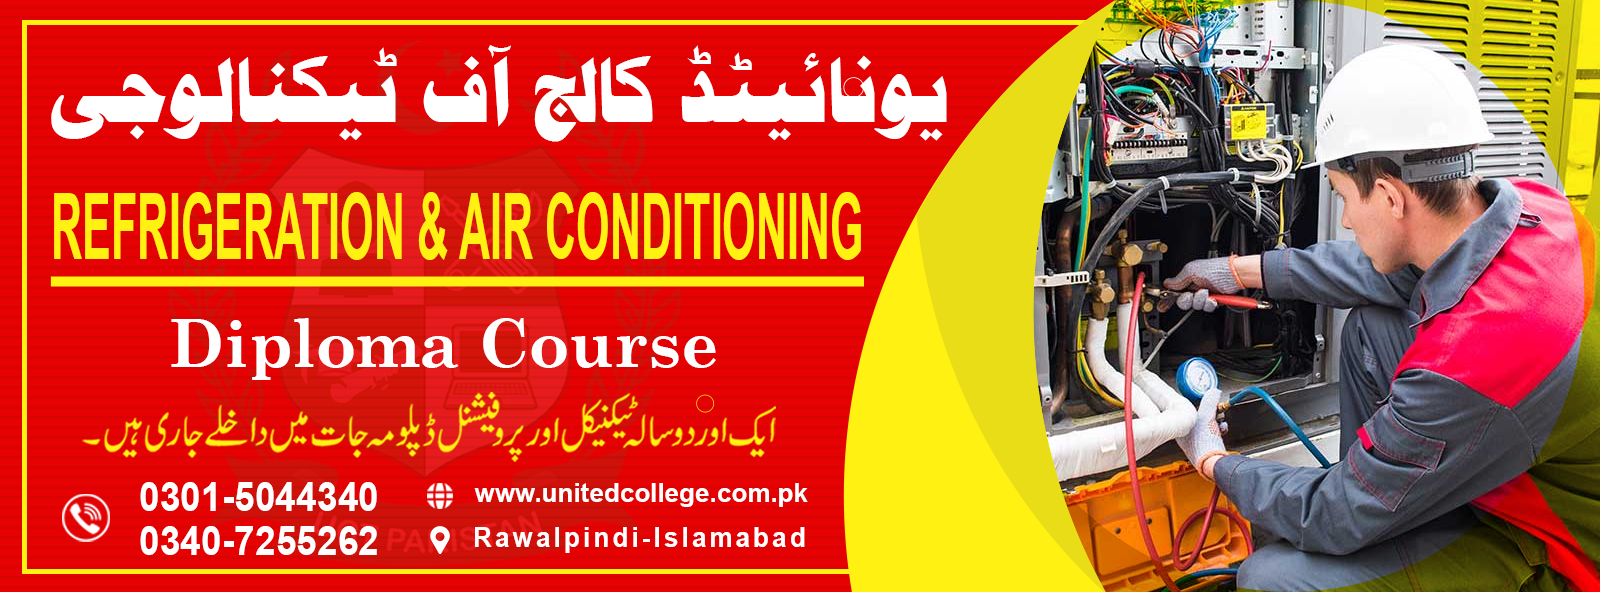 Refrigeration And Air Conditioning Course